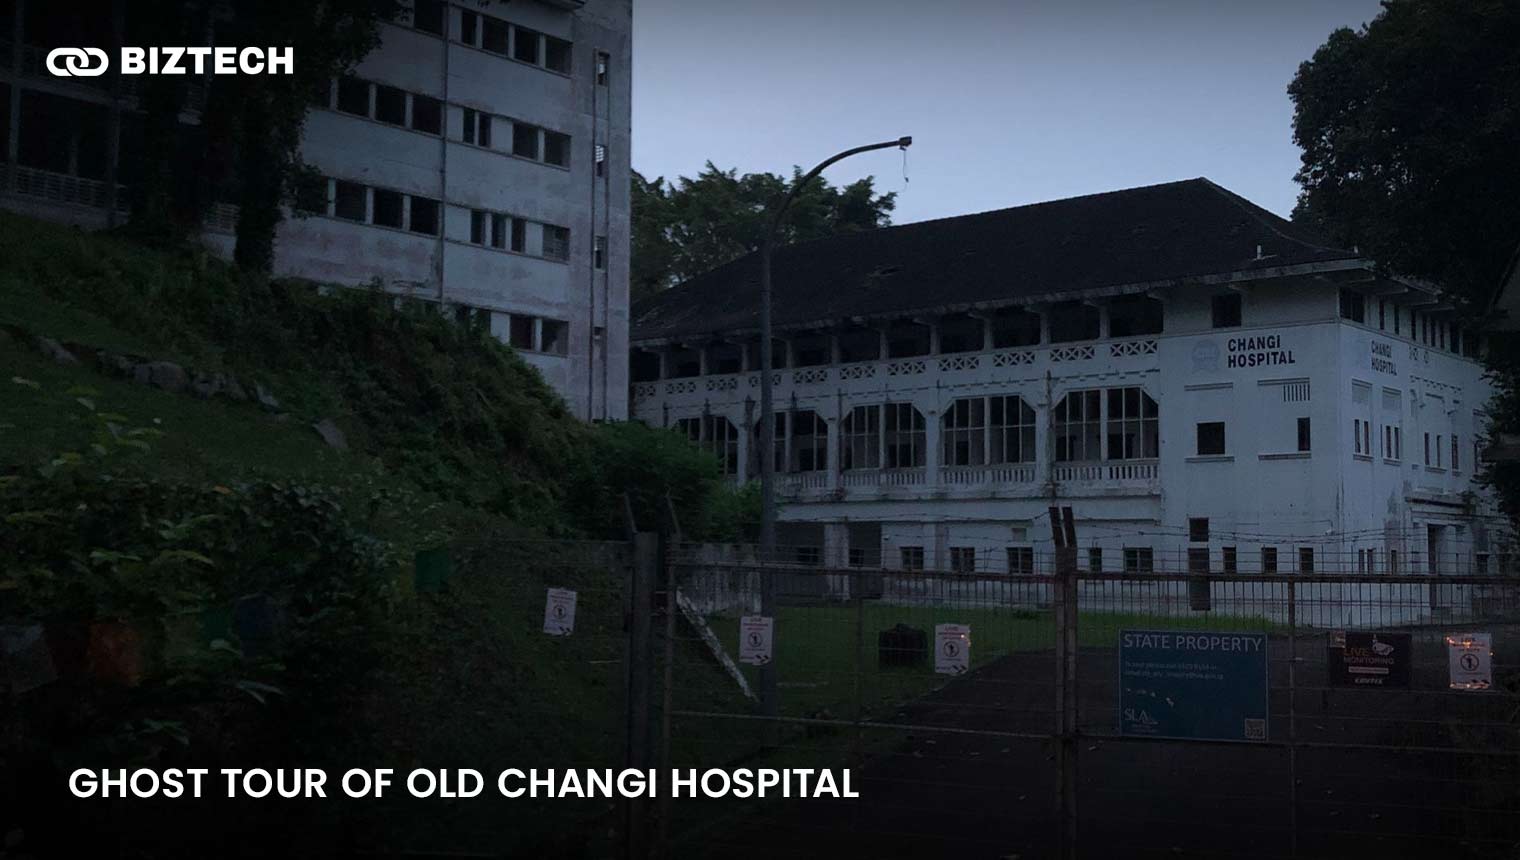 Ghost Tour of Old Changi Hospital